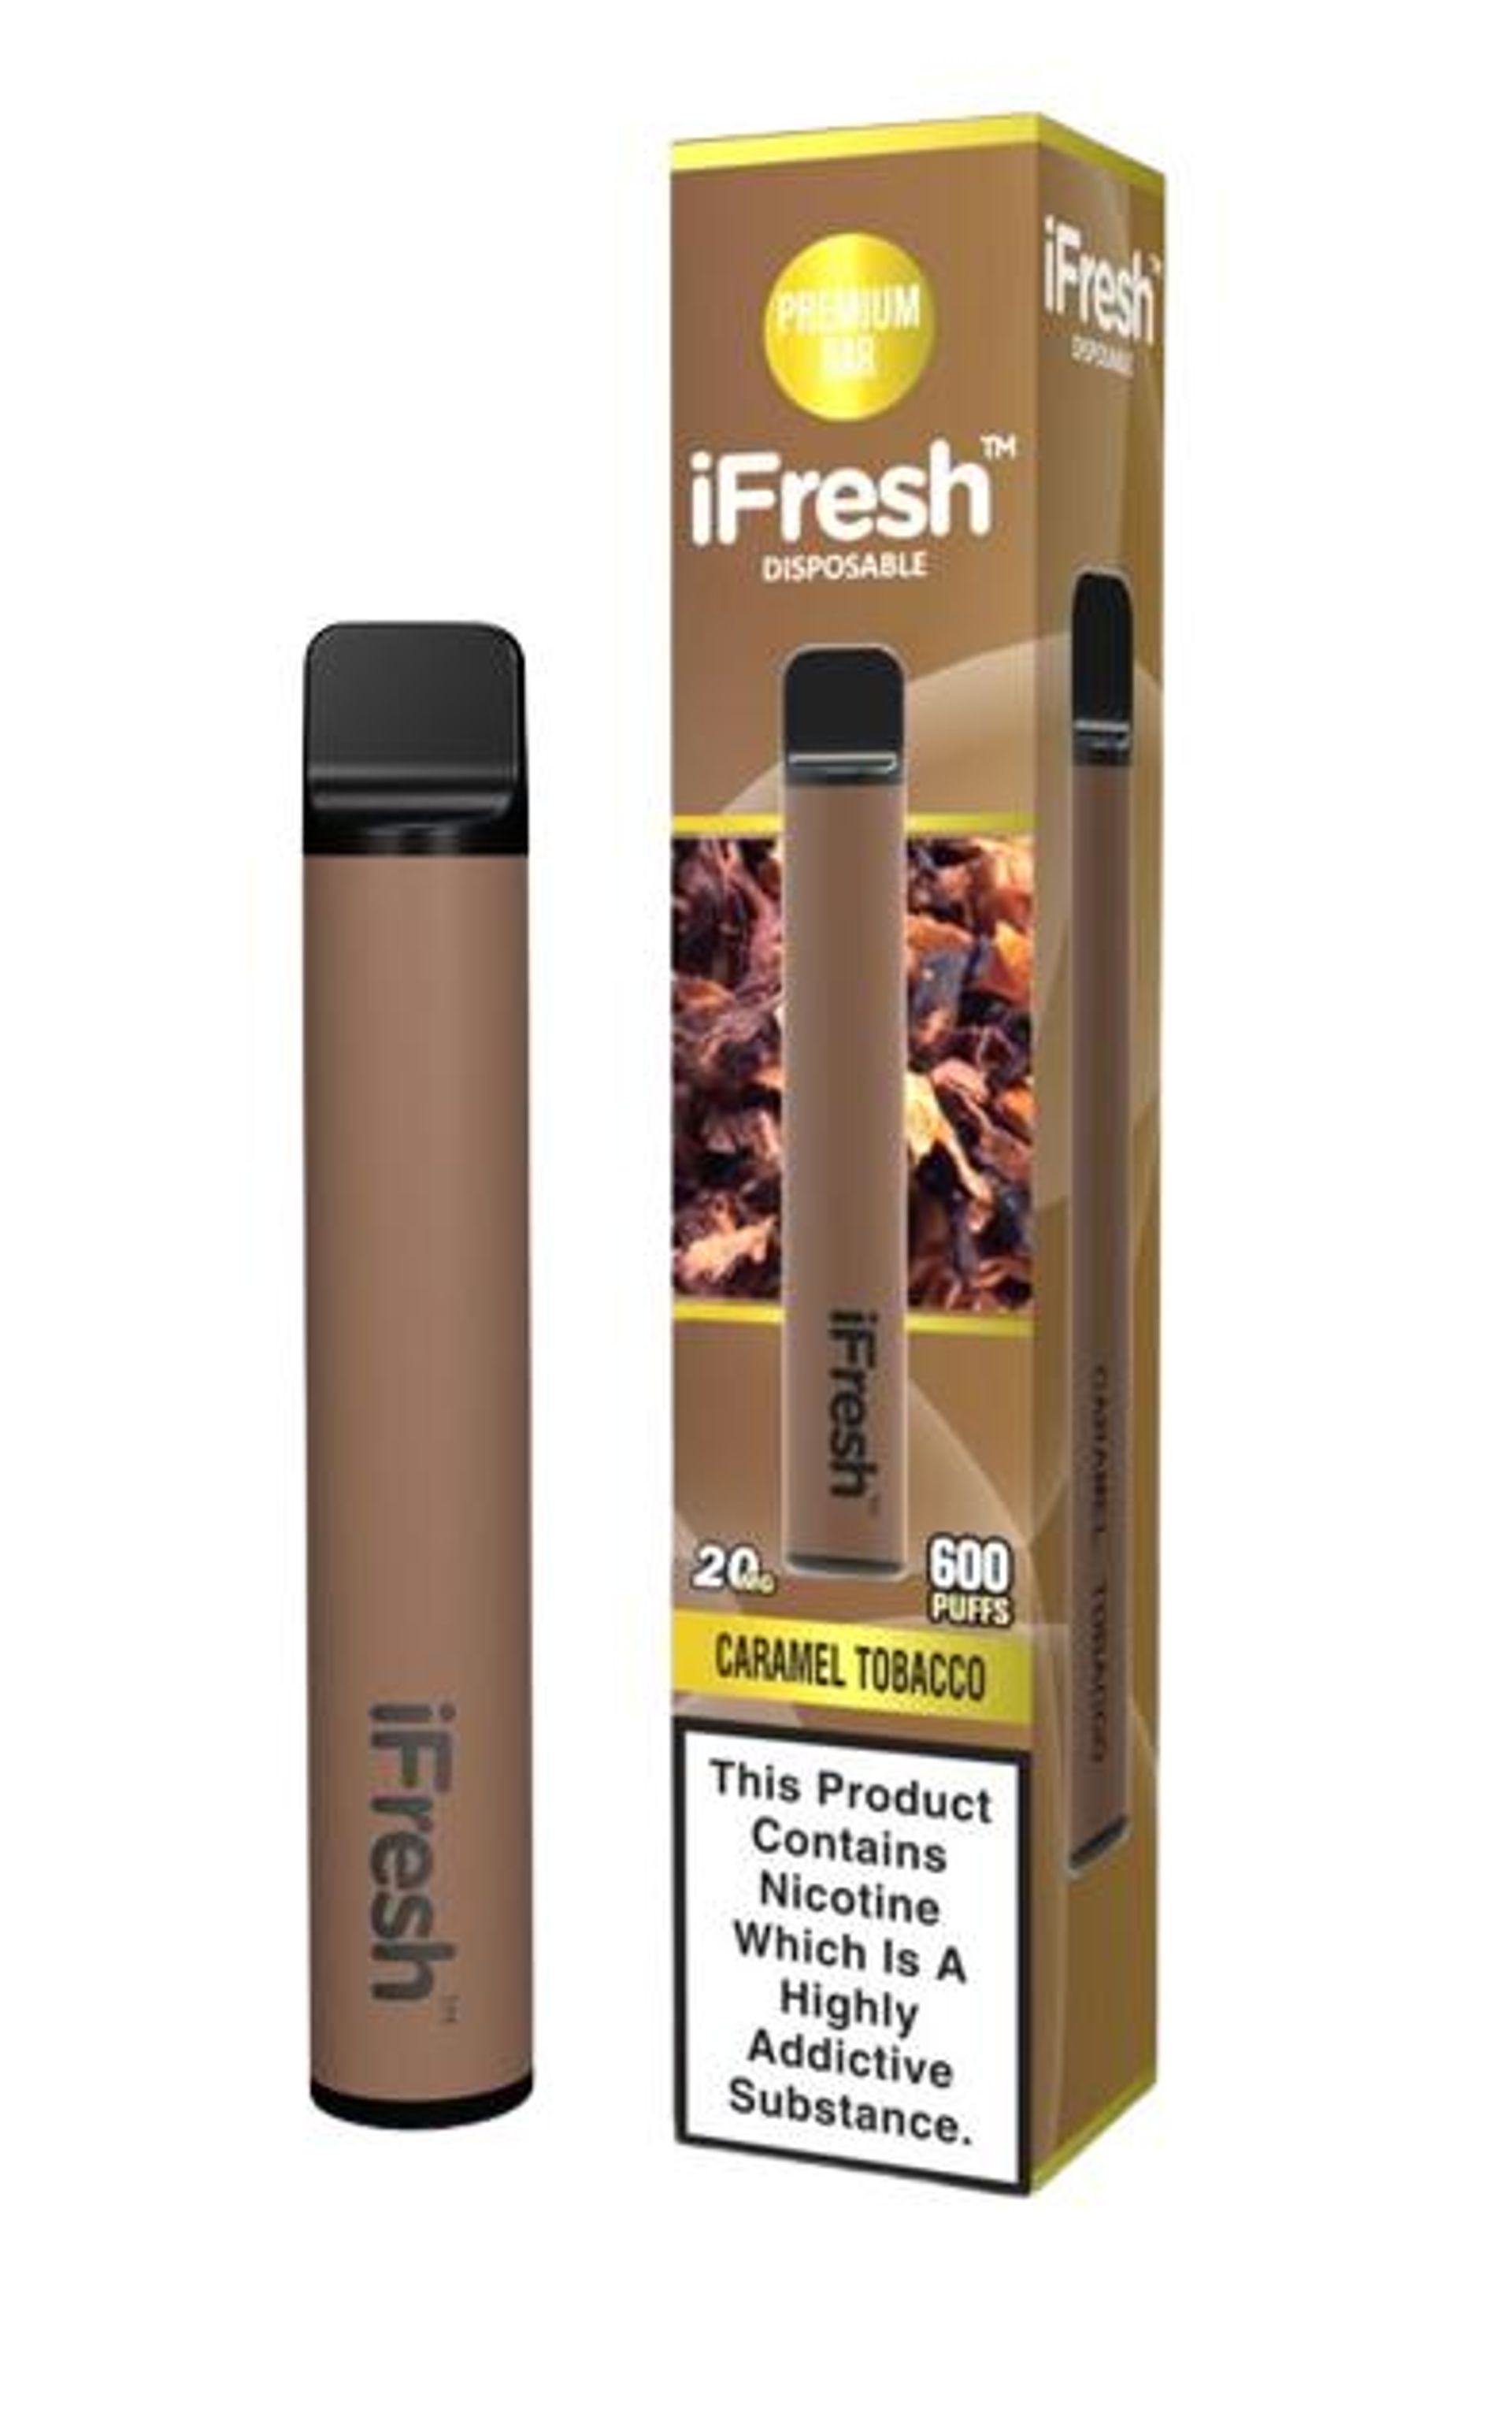 Image of Caramel Tobacco by IFresh